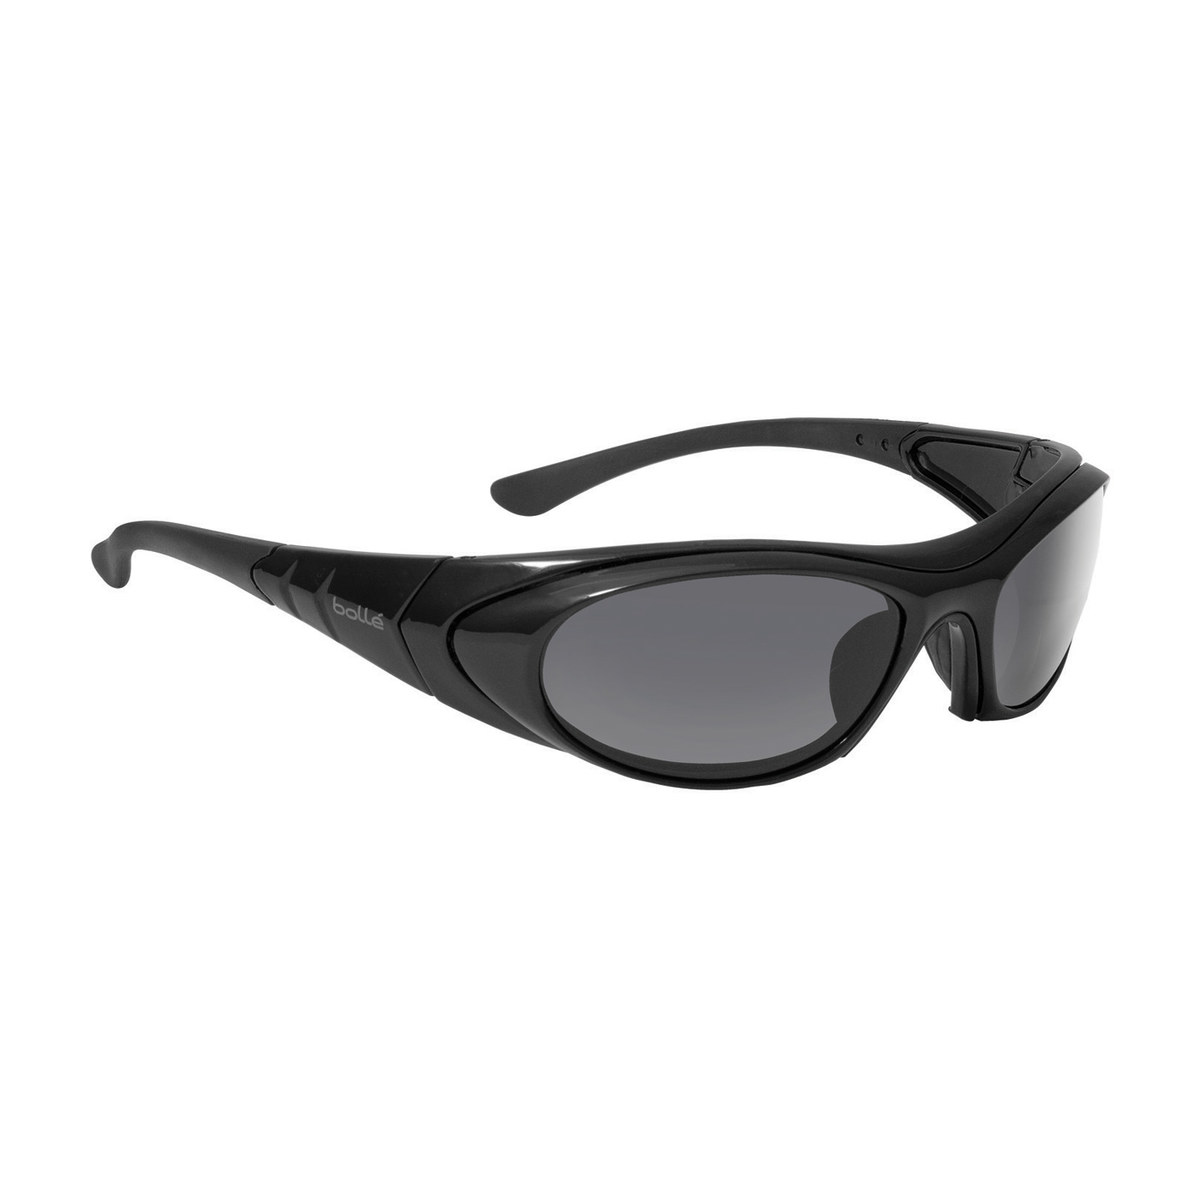 boss sunglasses come with